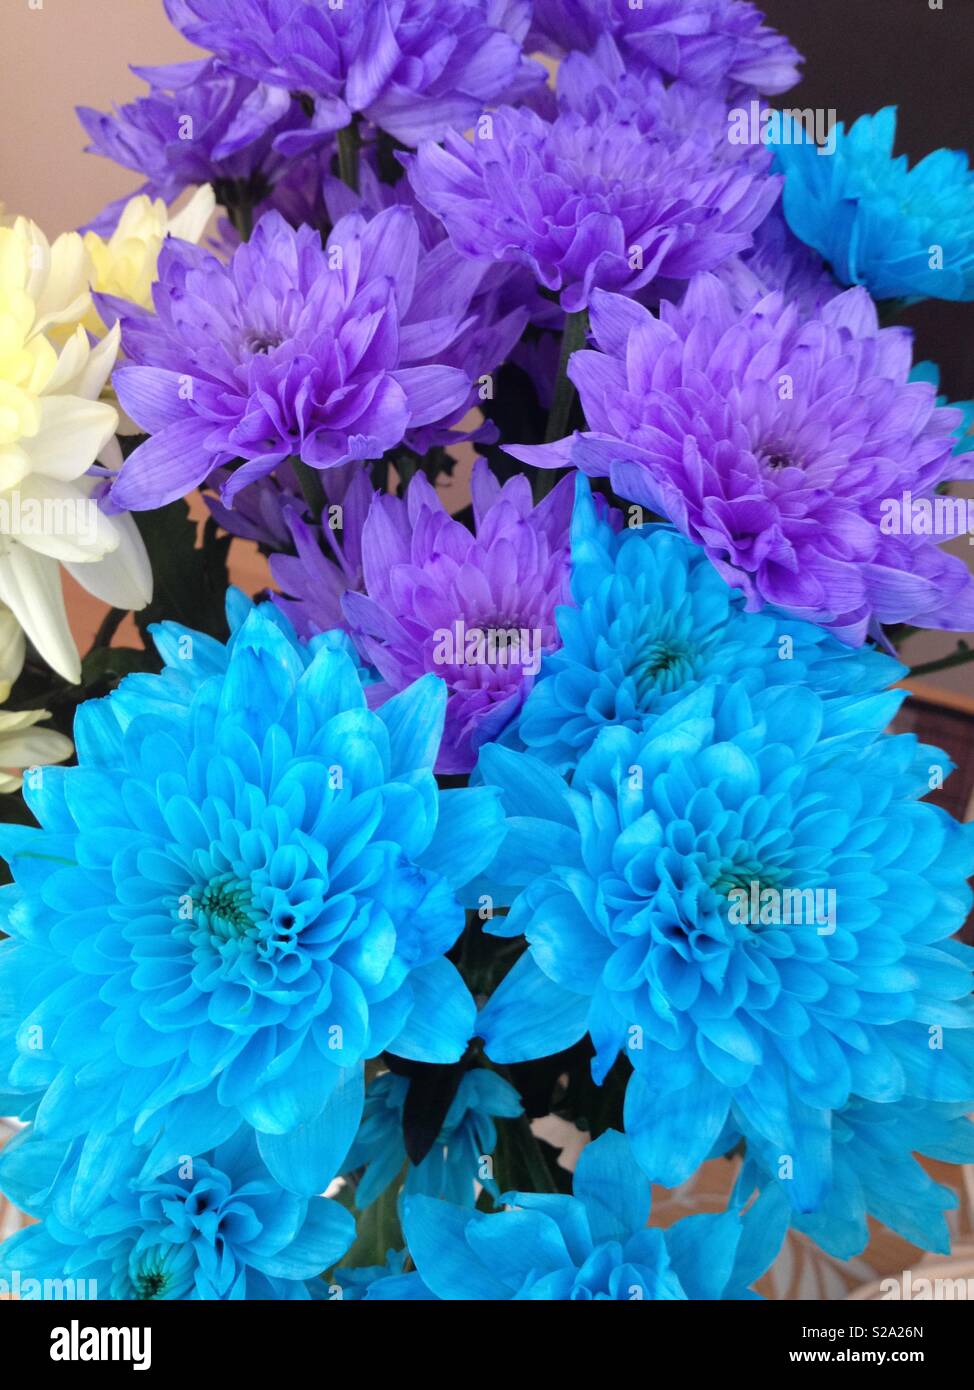 Chrysanthemums turquoise blue flowers bouquet purple and yellow Stock Photo